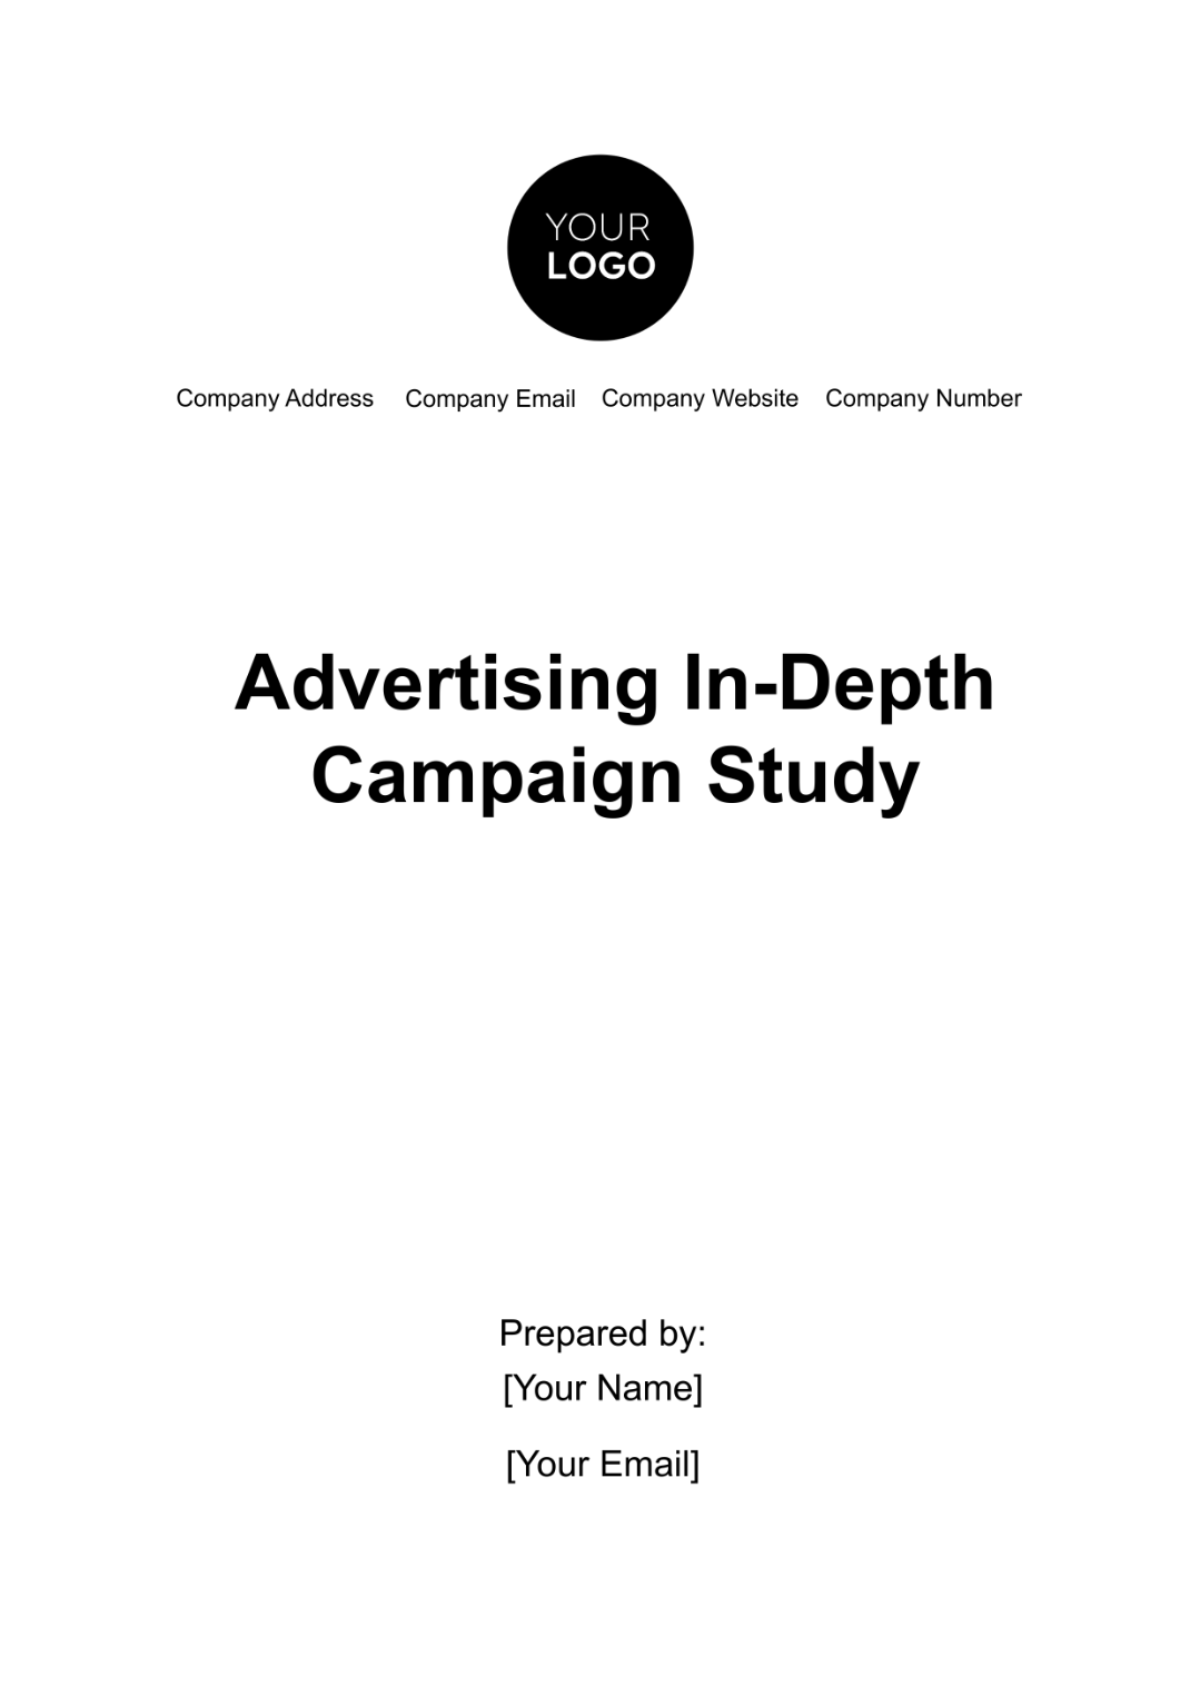 Advertising In-Depth Campaign Study Template